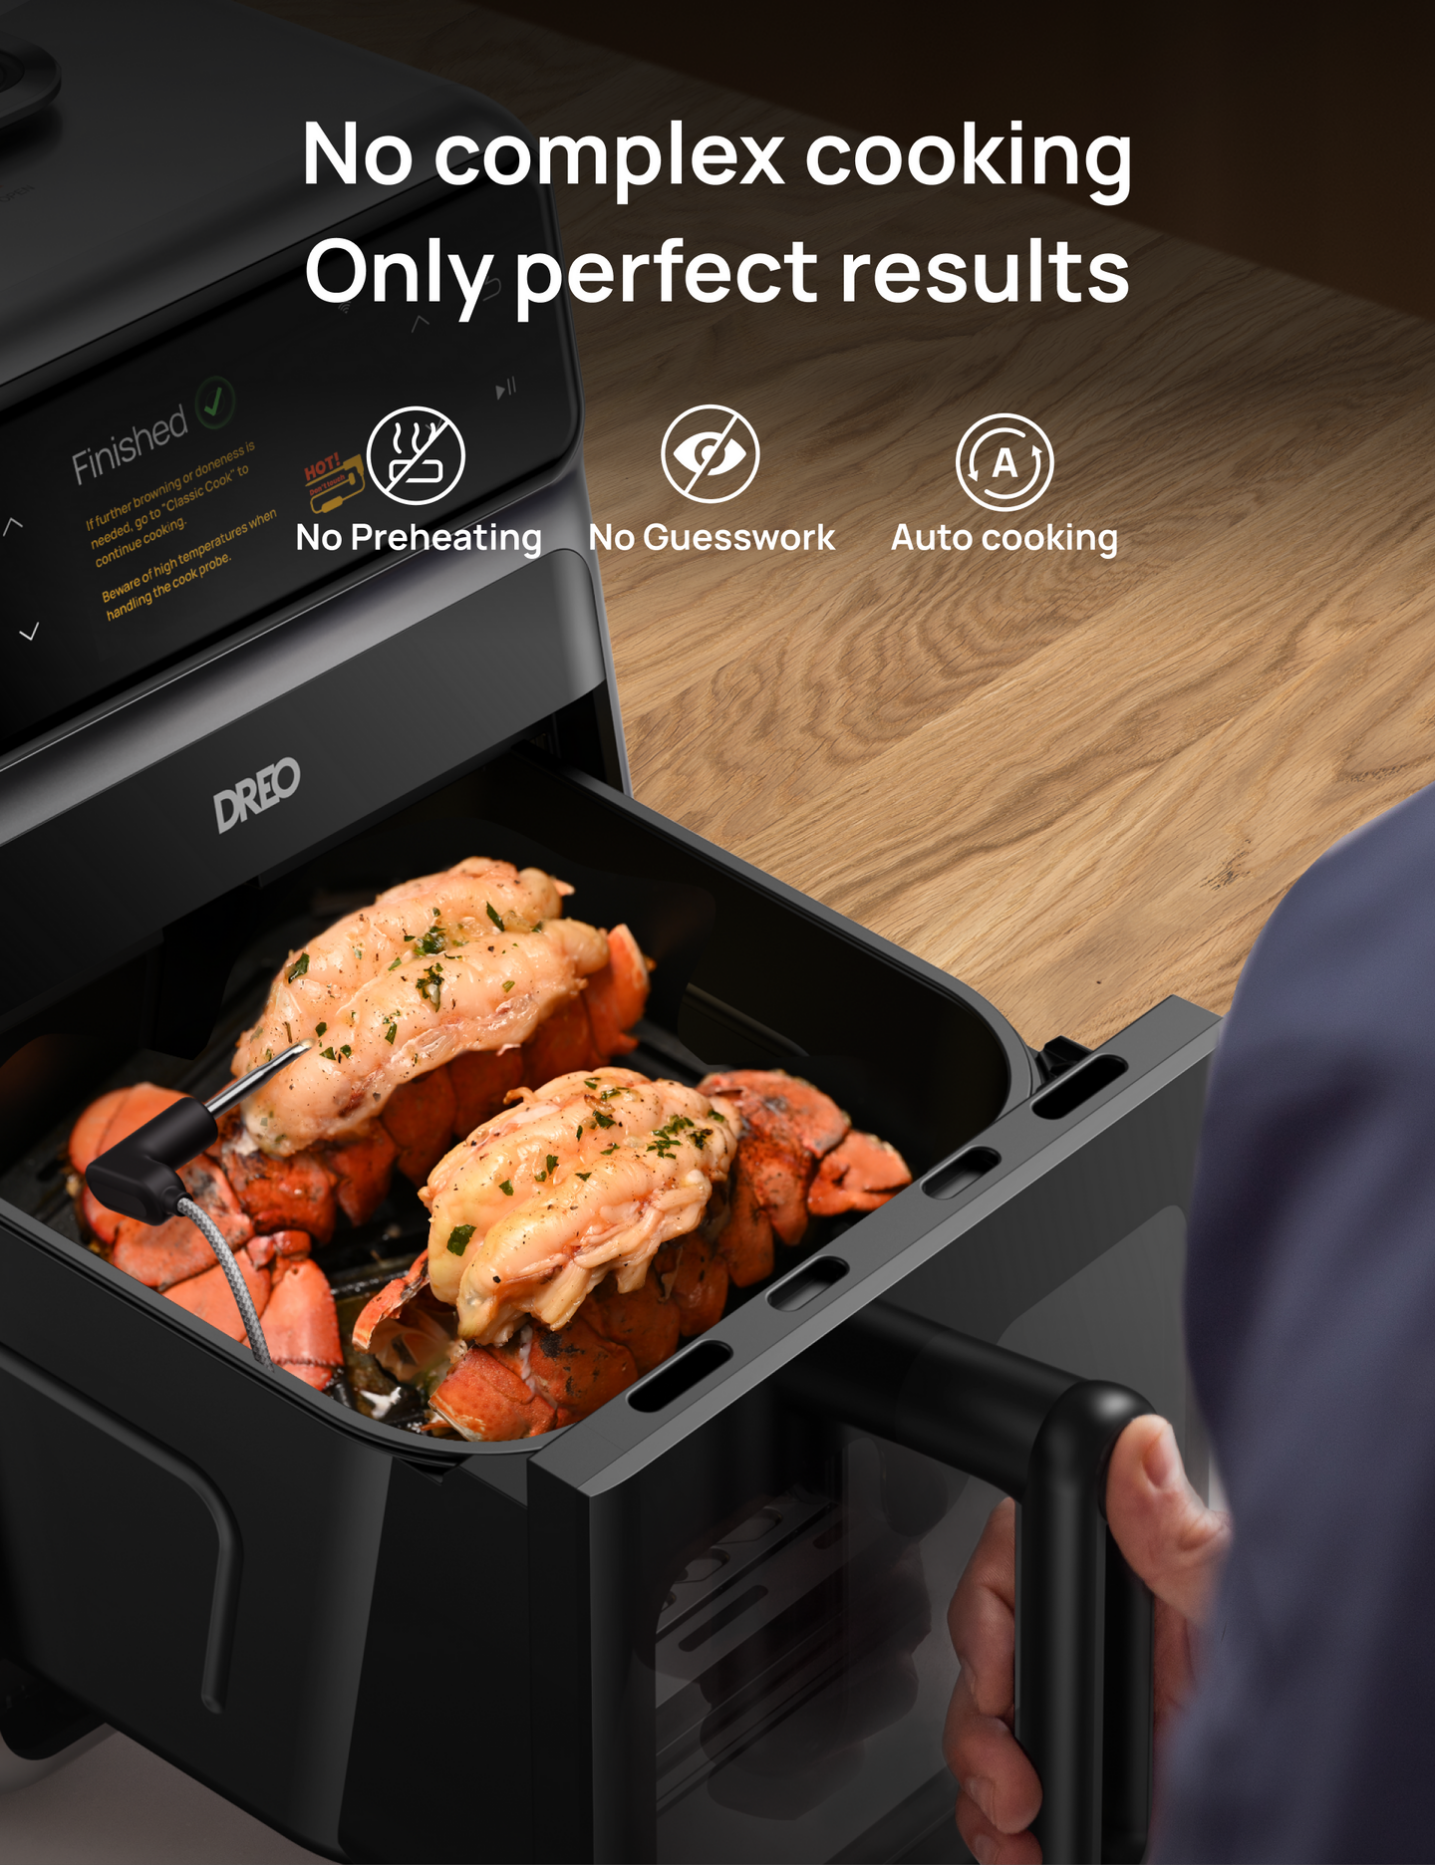 Dreo ChefMaker the world's first combi fryer secures $1 M on Kickstarter in  one day - PR Newswire APAC